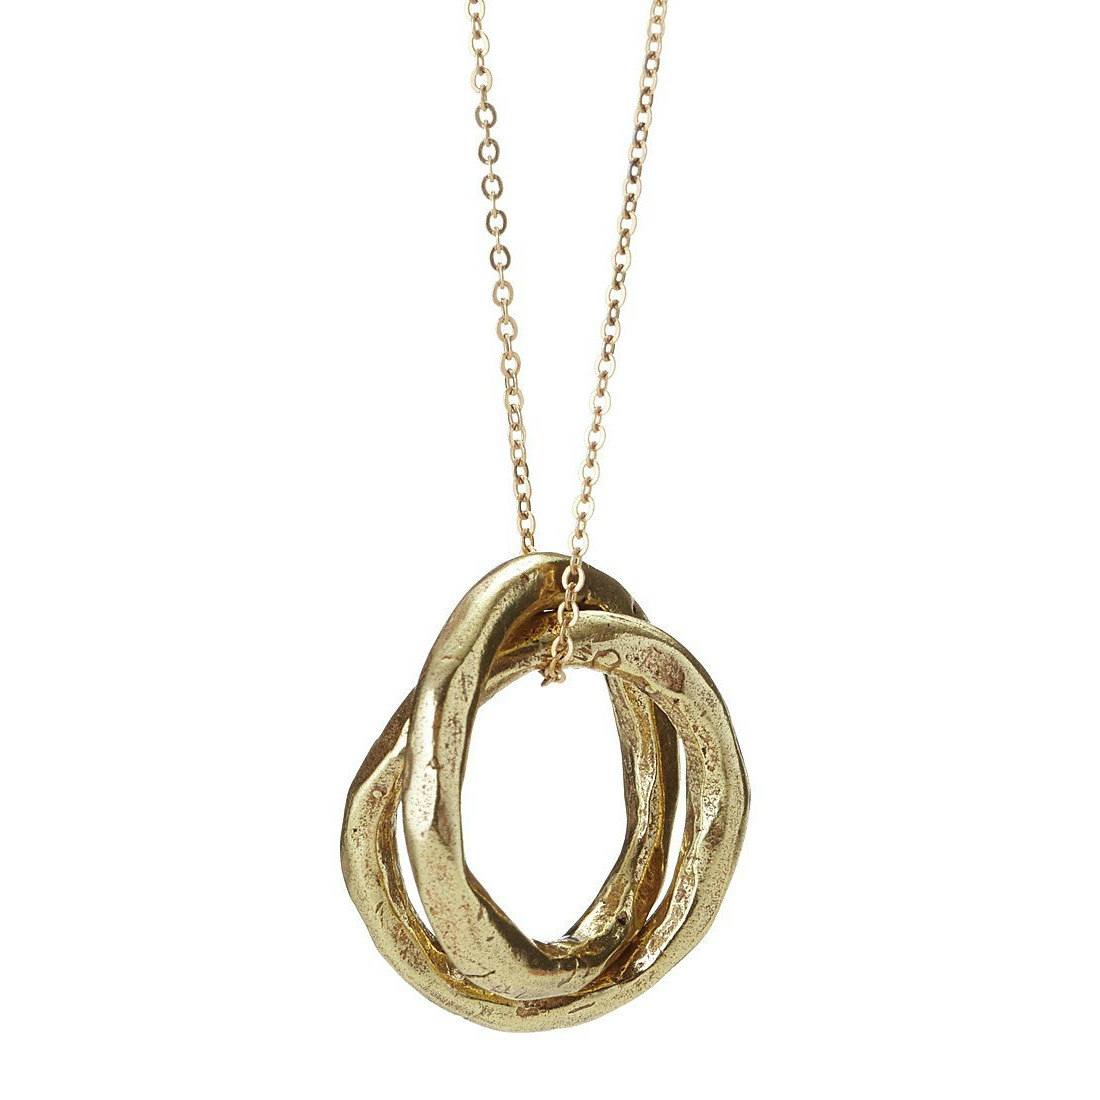 We Are One Necklace | UncommonGoods